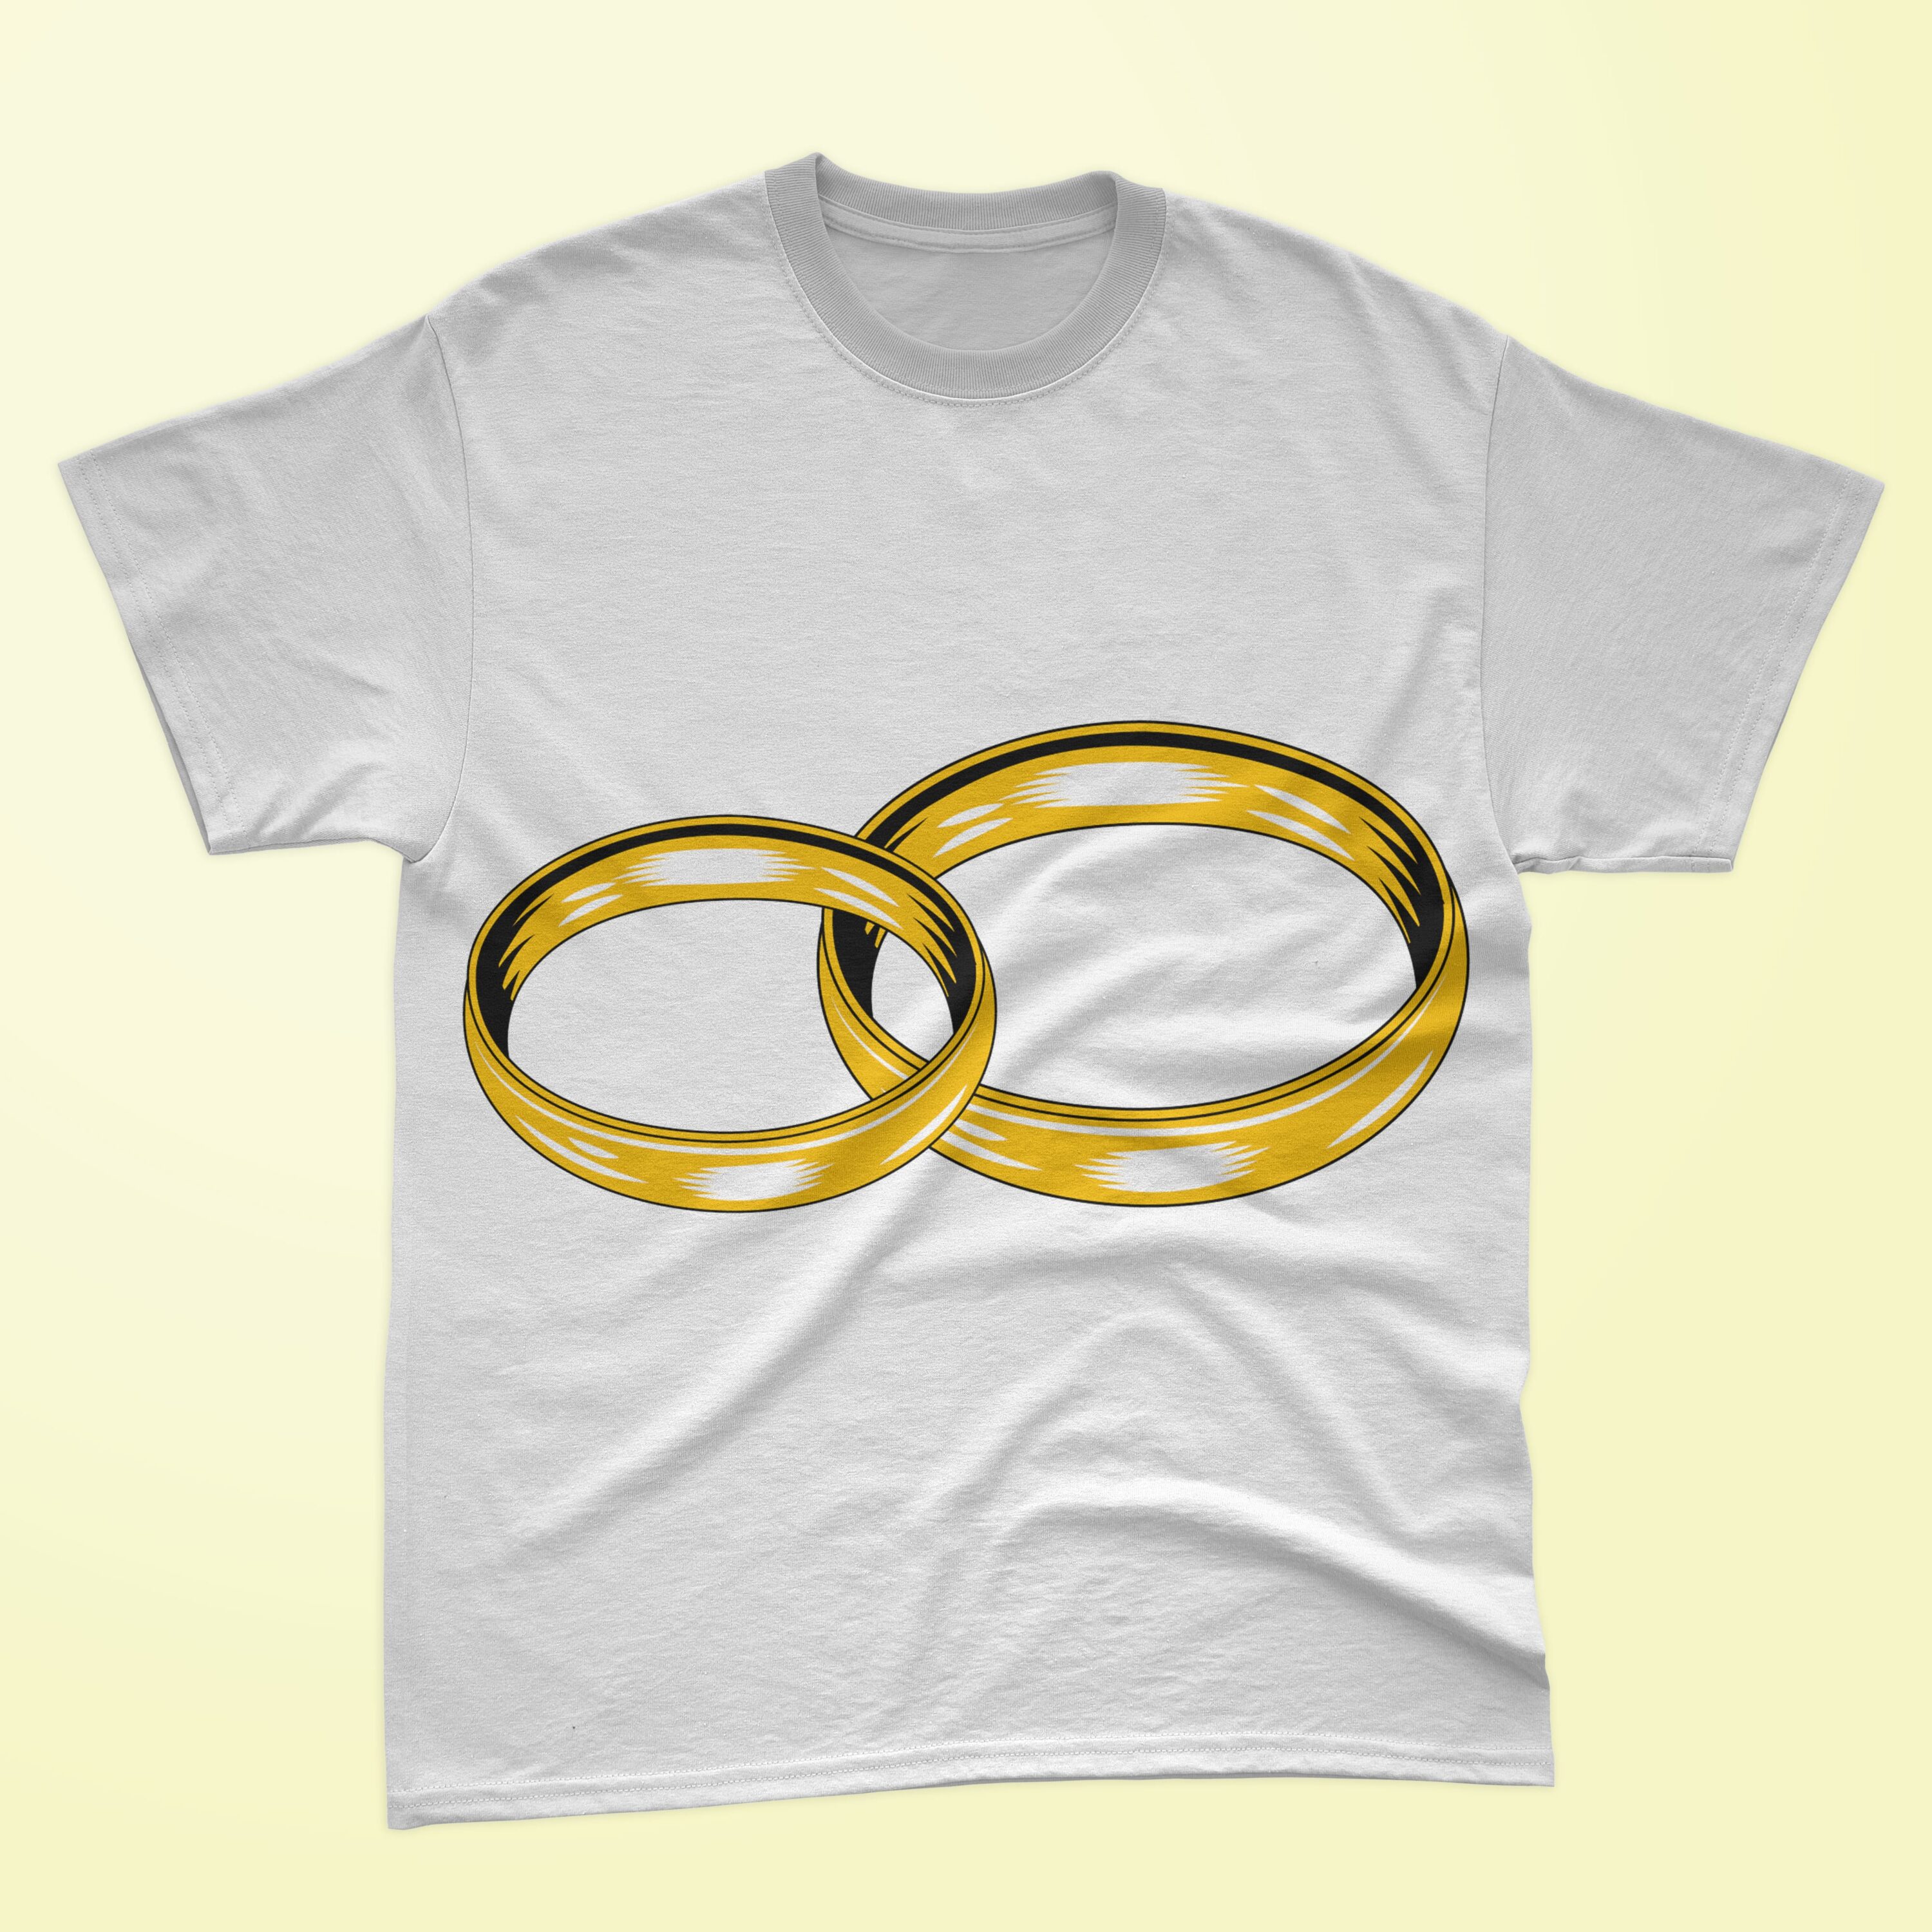 T-shirt picture with cute rings print for engagement.